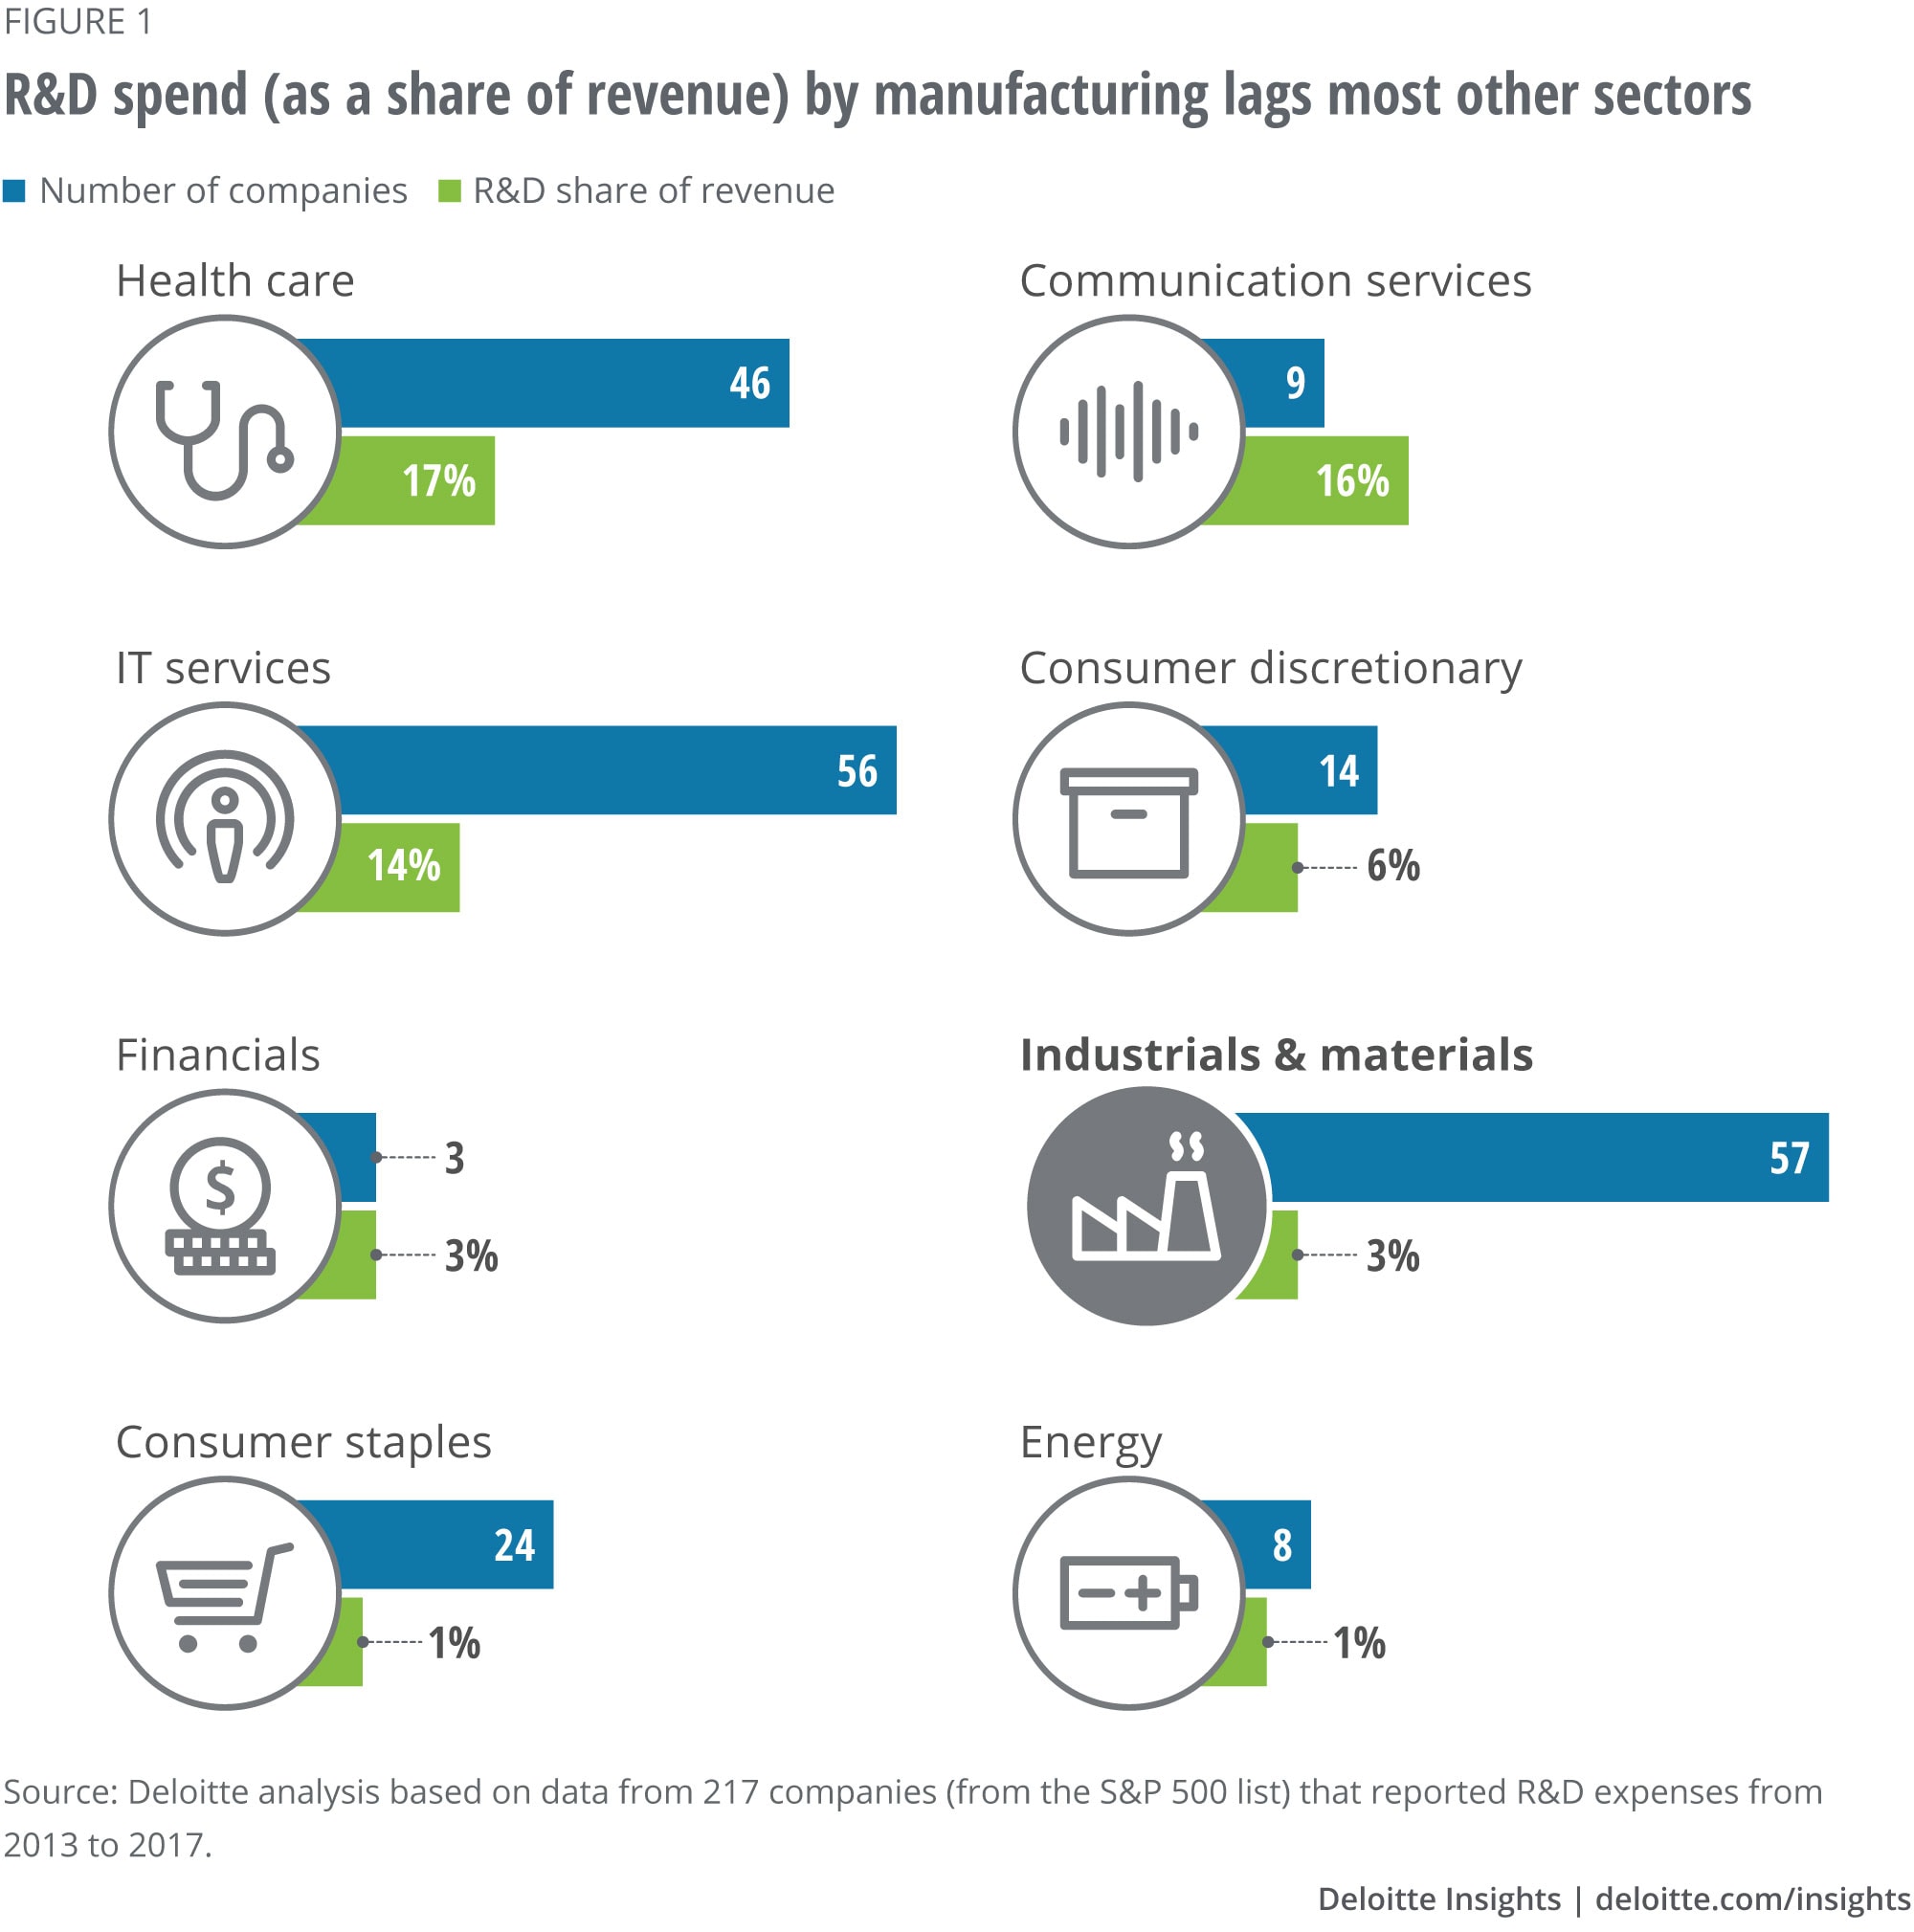 R&D spend (as a share of revenue) at manufacturing lags most other sectors